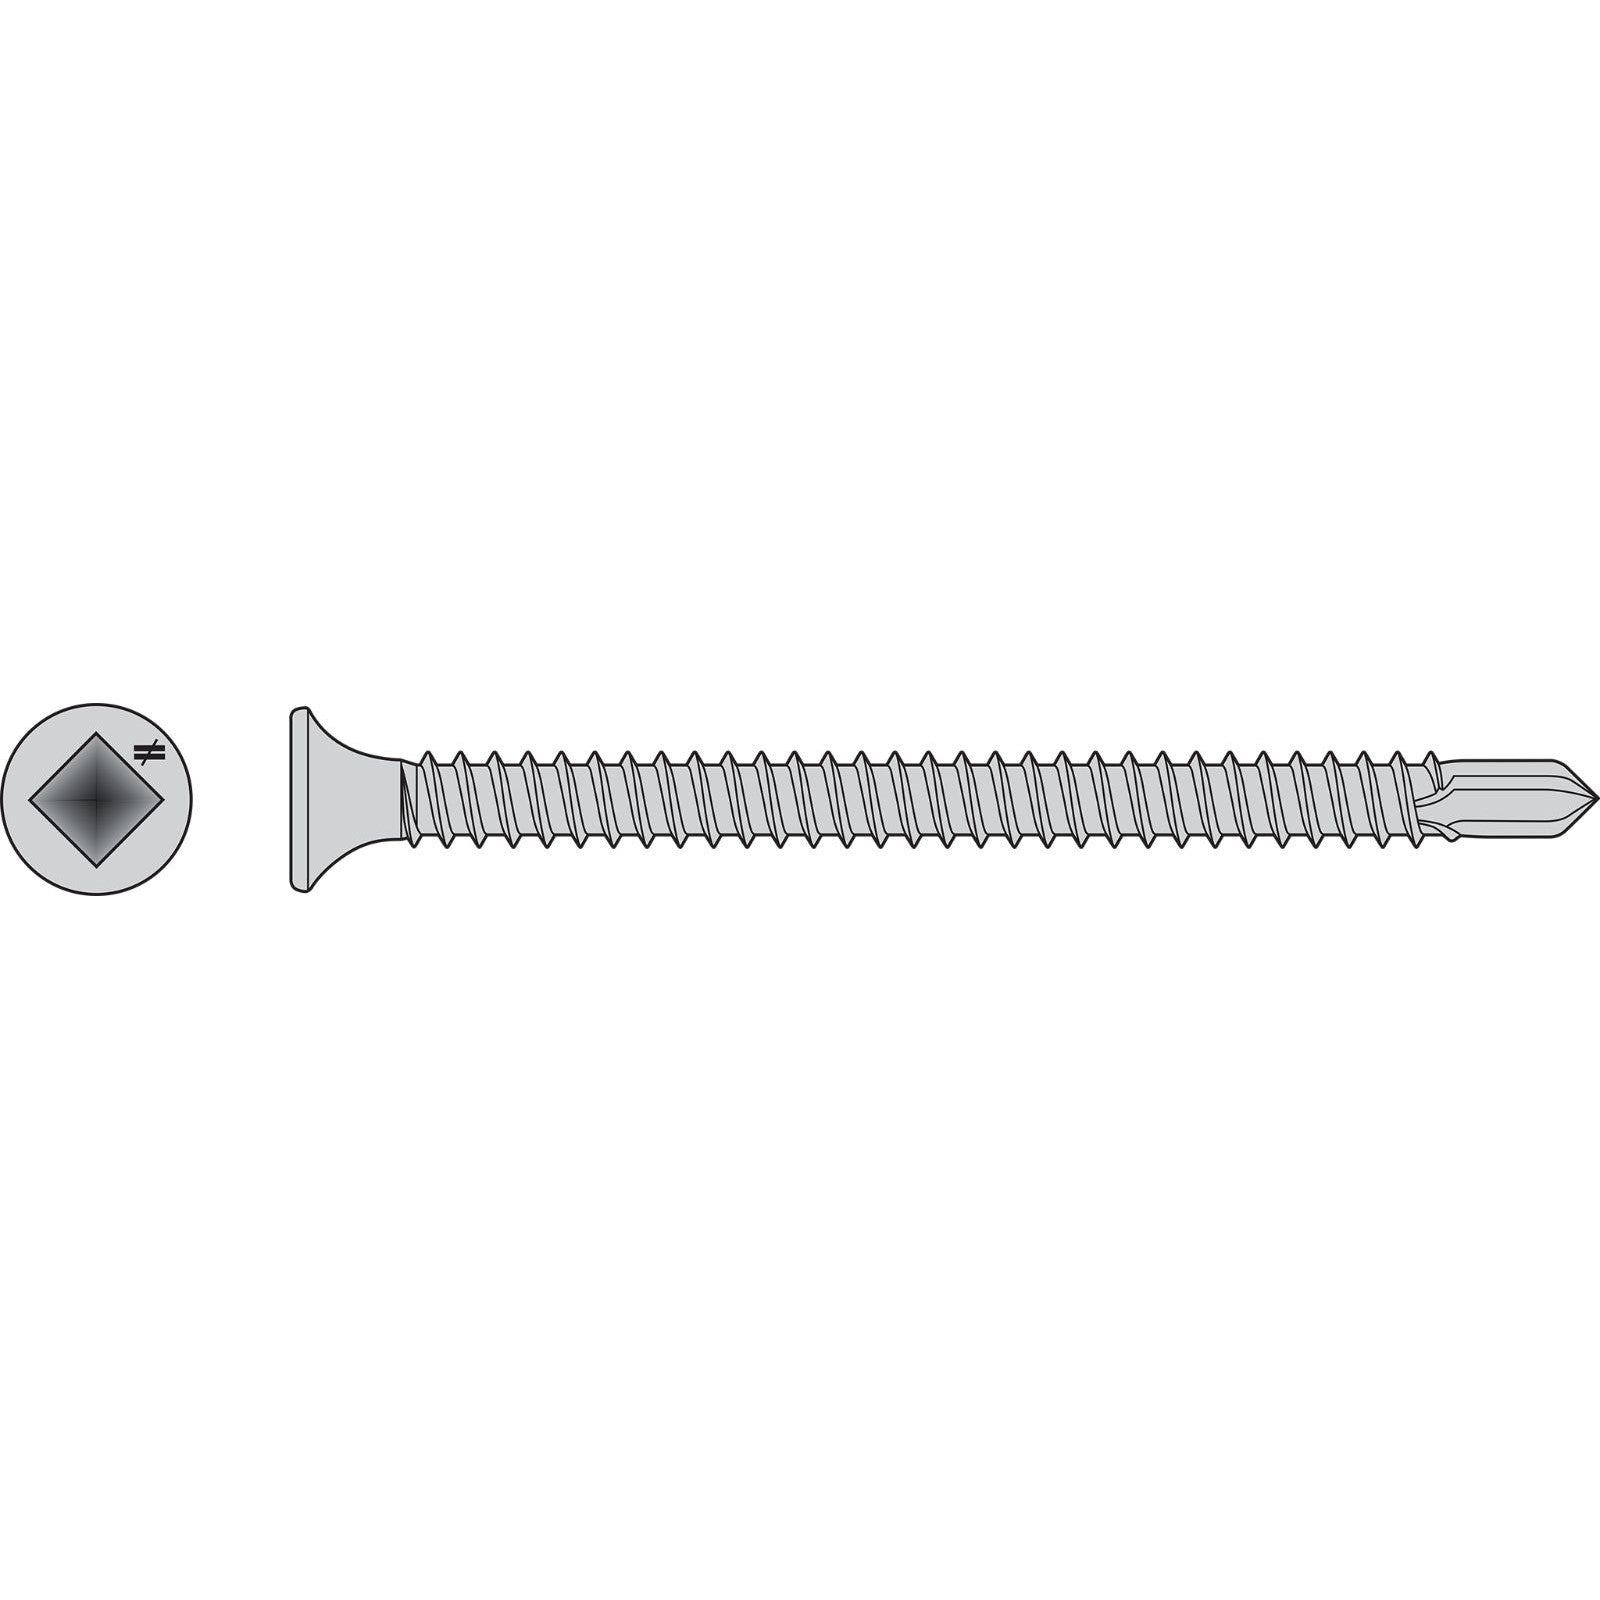 #10 x 312 inch Square Drive SelfDrilling BugleHead Screw 410 Stainless Steel Pkg 1000